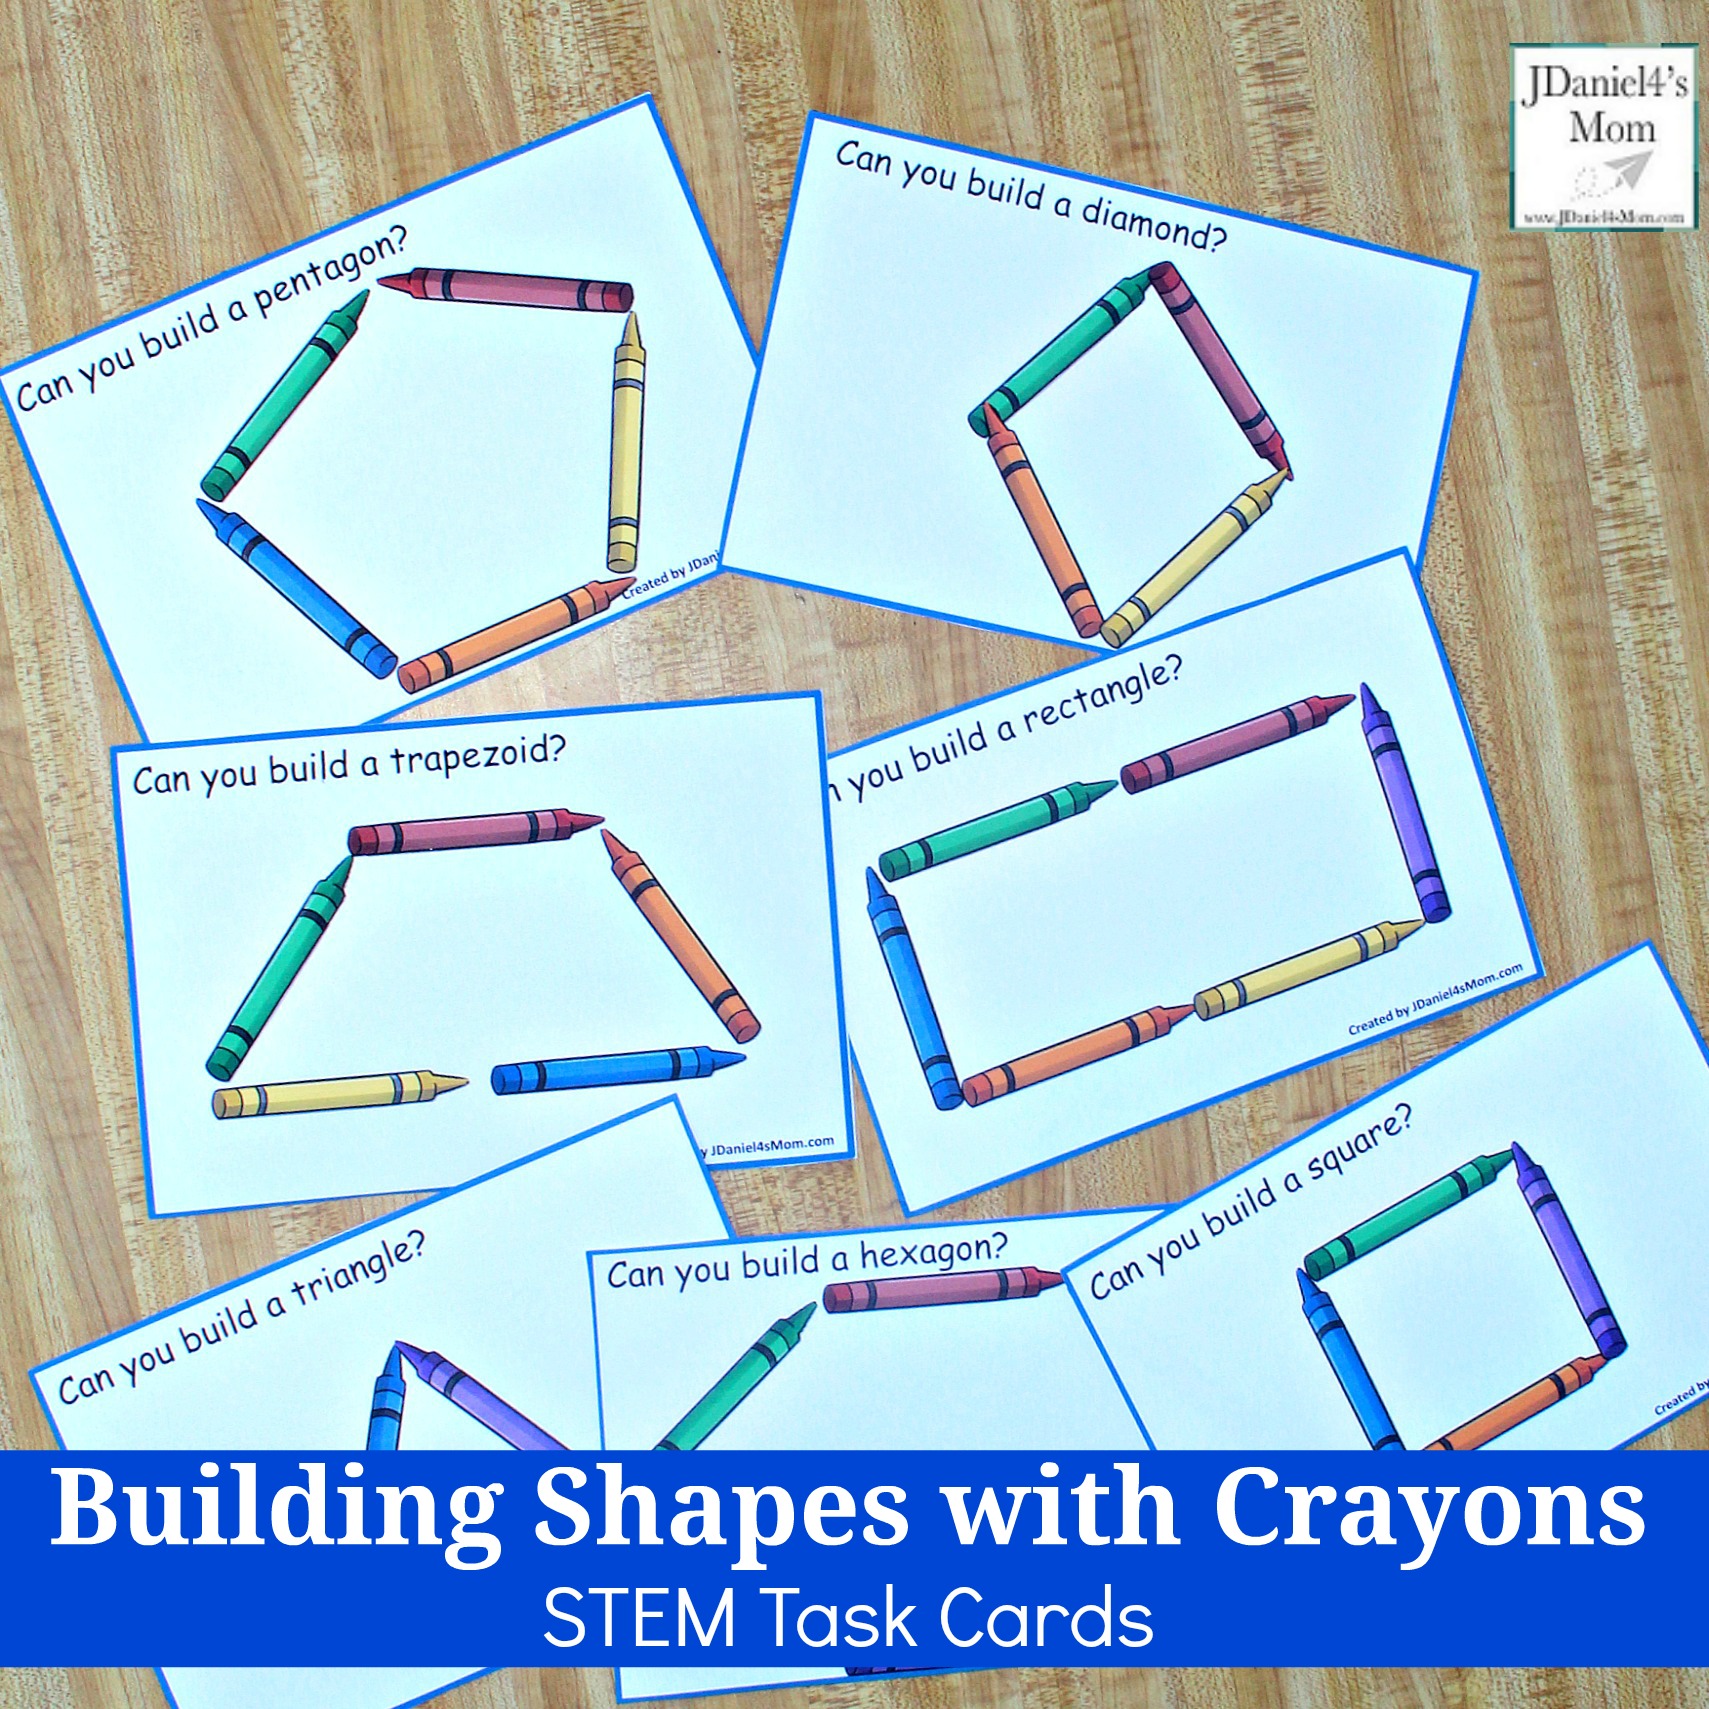 Building Shapes with Crayons STEM Task Cards